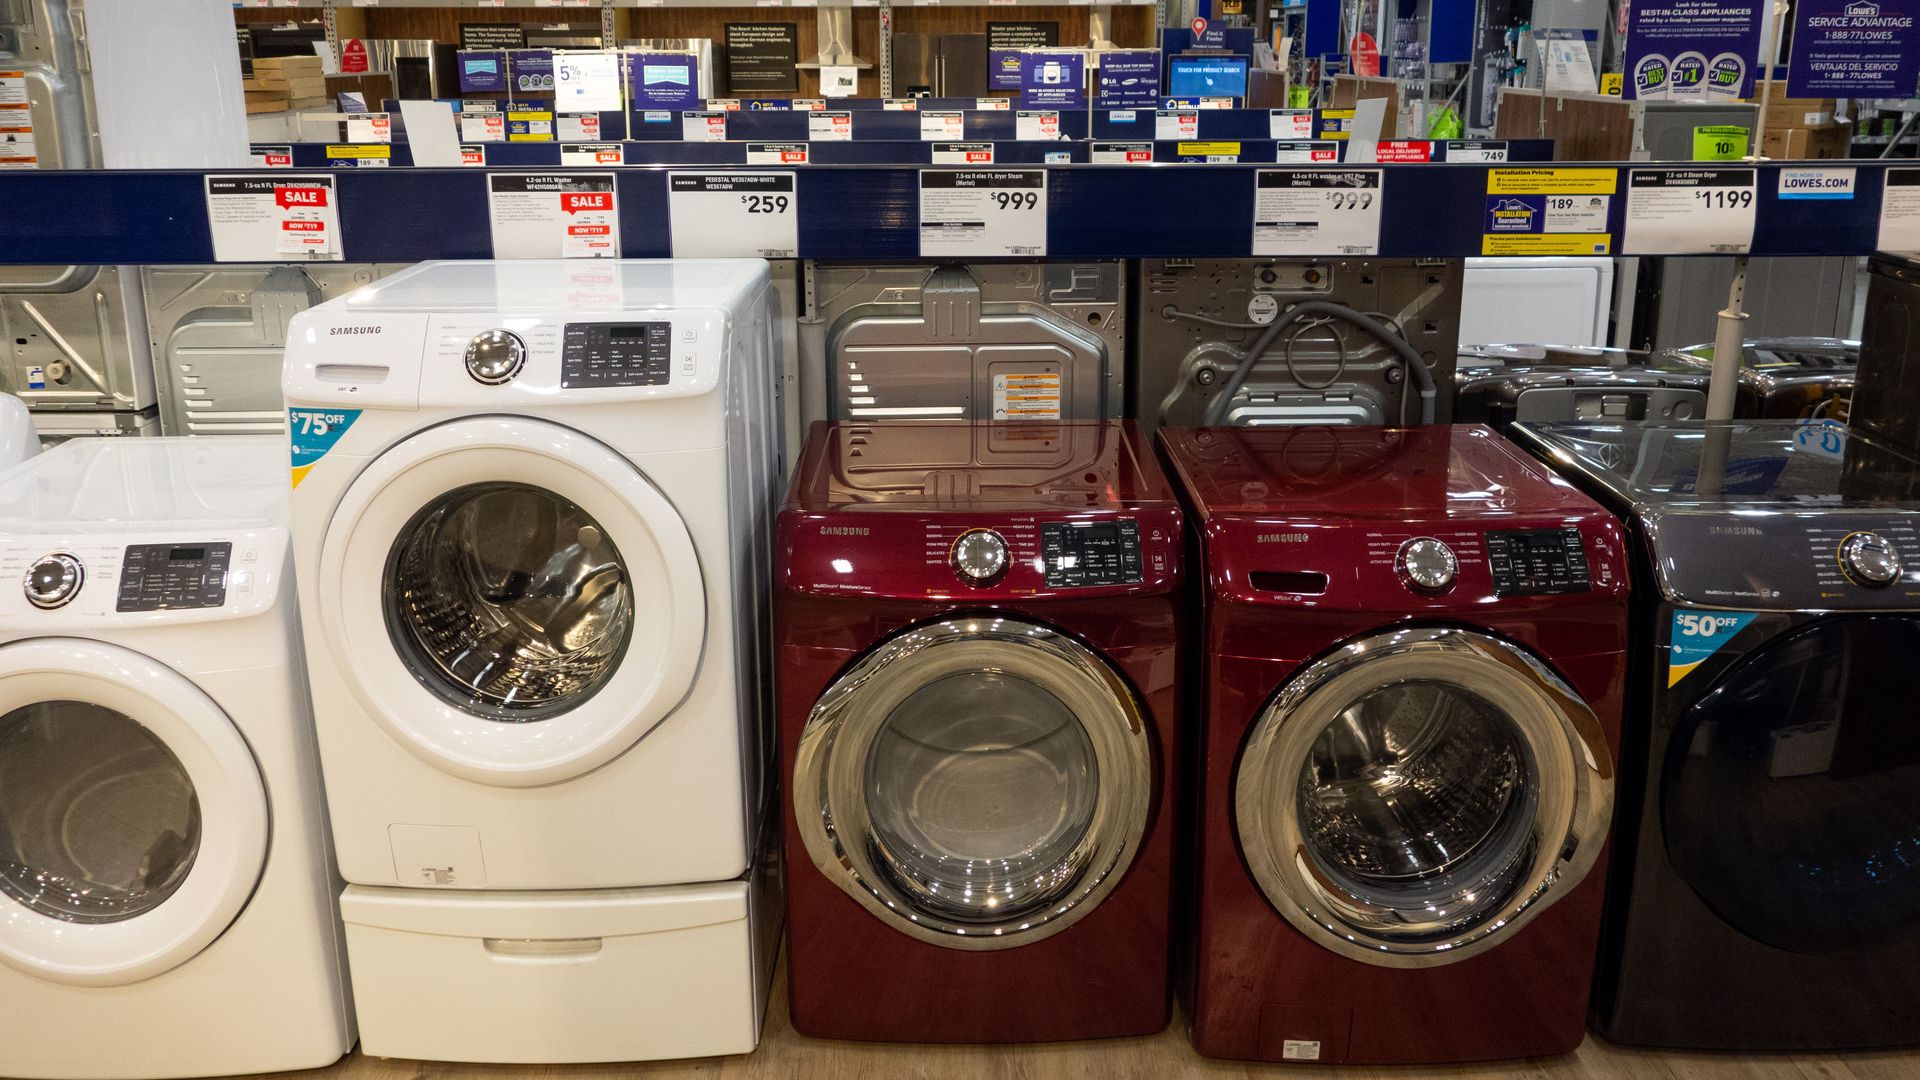 In this image, a row of different colors and brands of washing machines sit in a store.